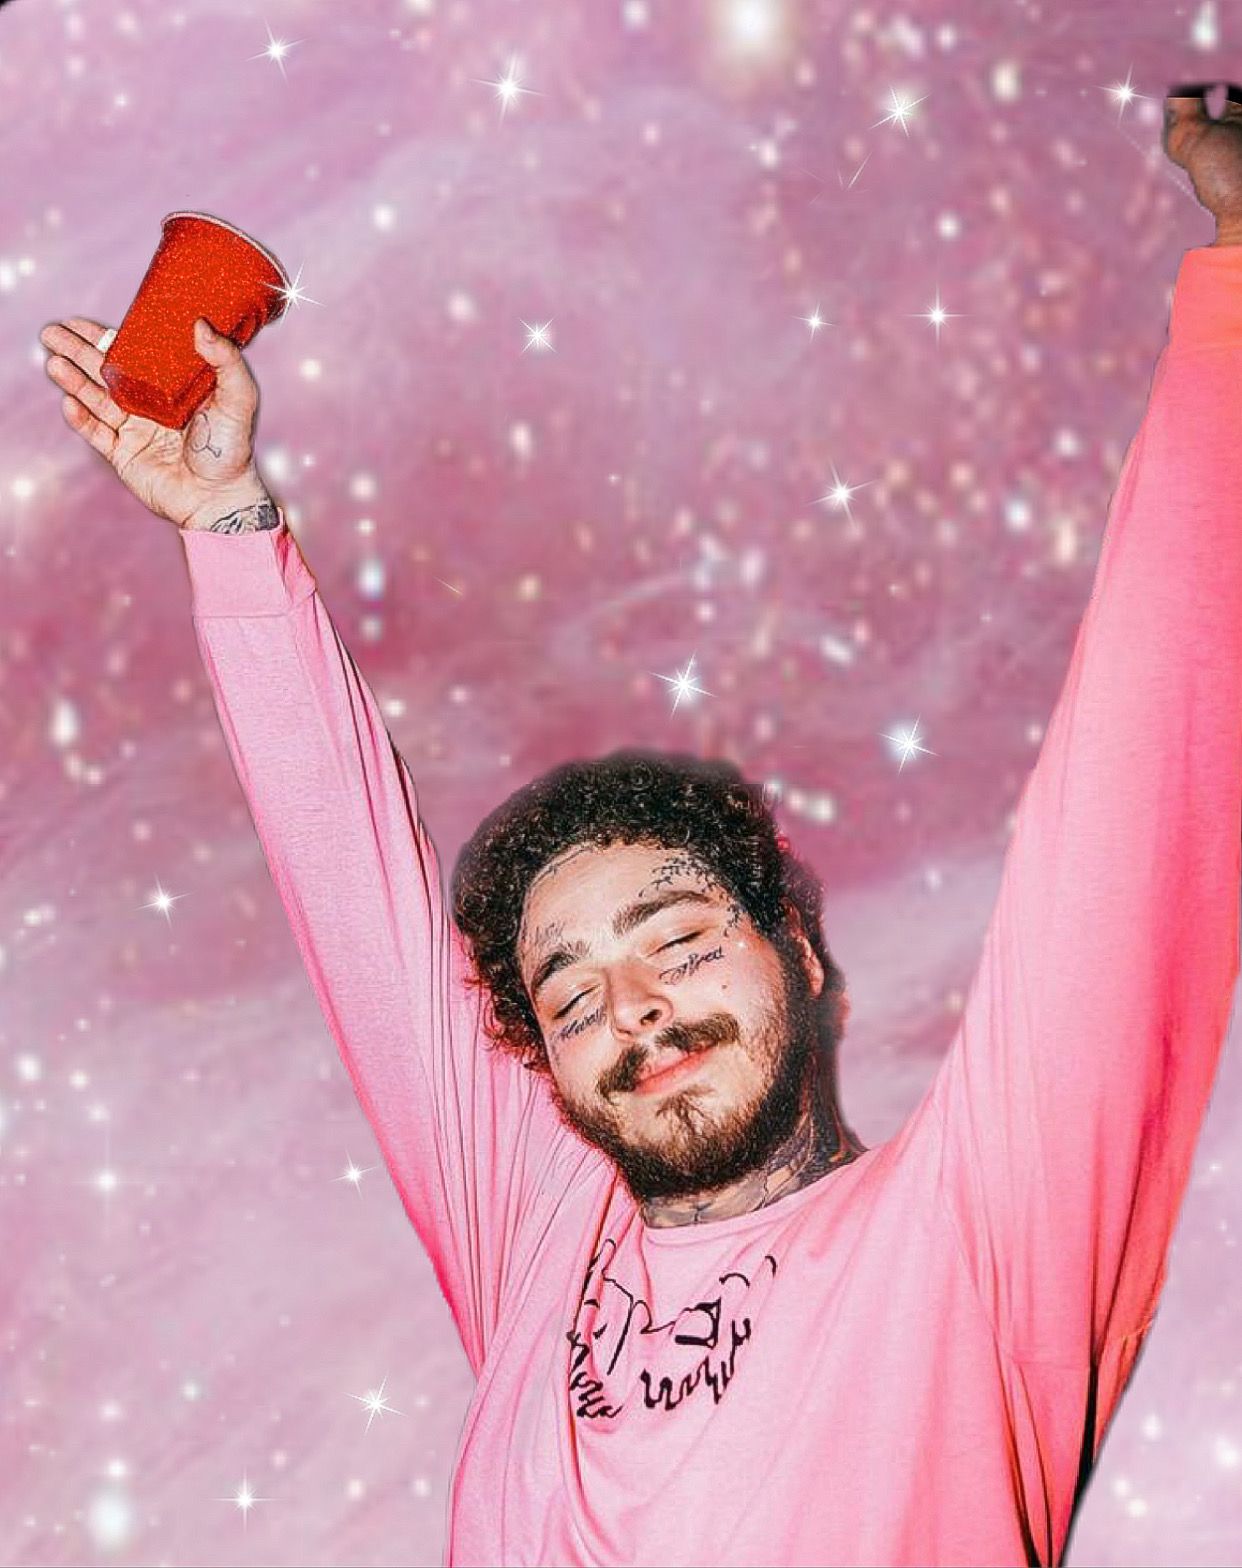 Post Malone iPhone Wallpaper. Post malone wallpaper, Picture collage wall, Photo wall collage